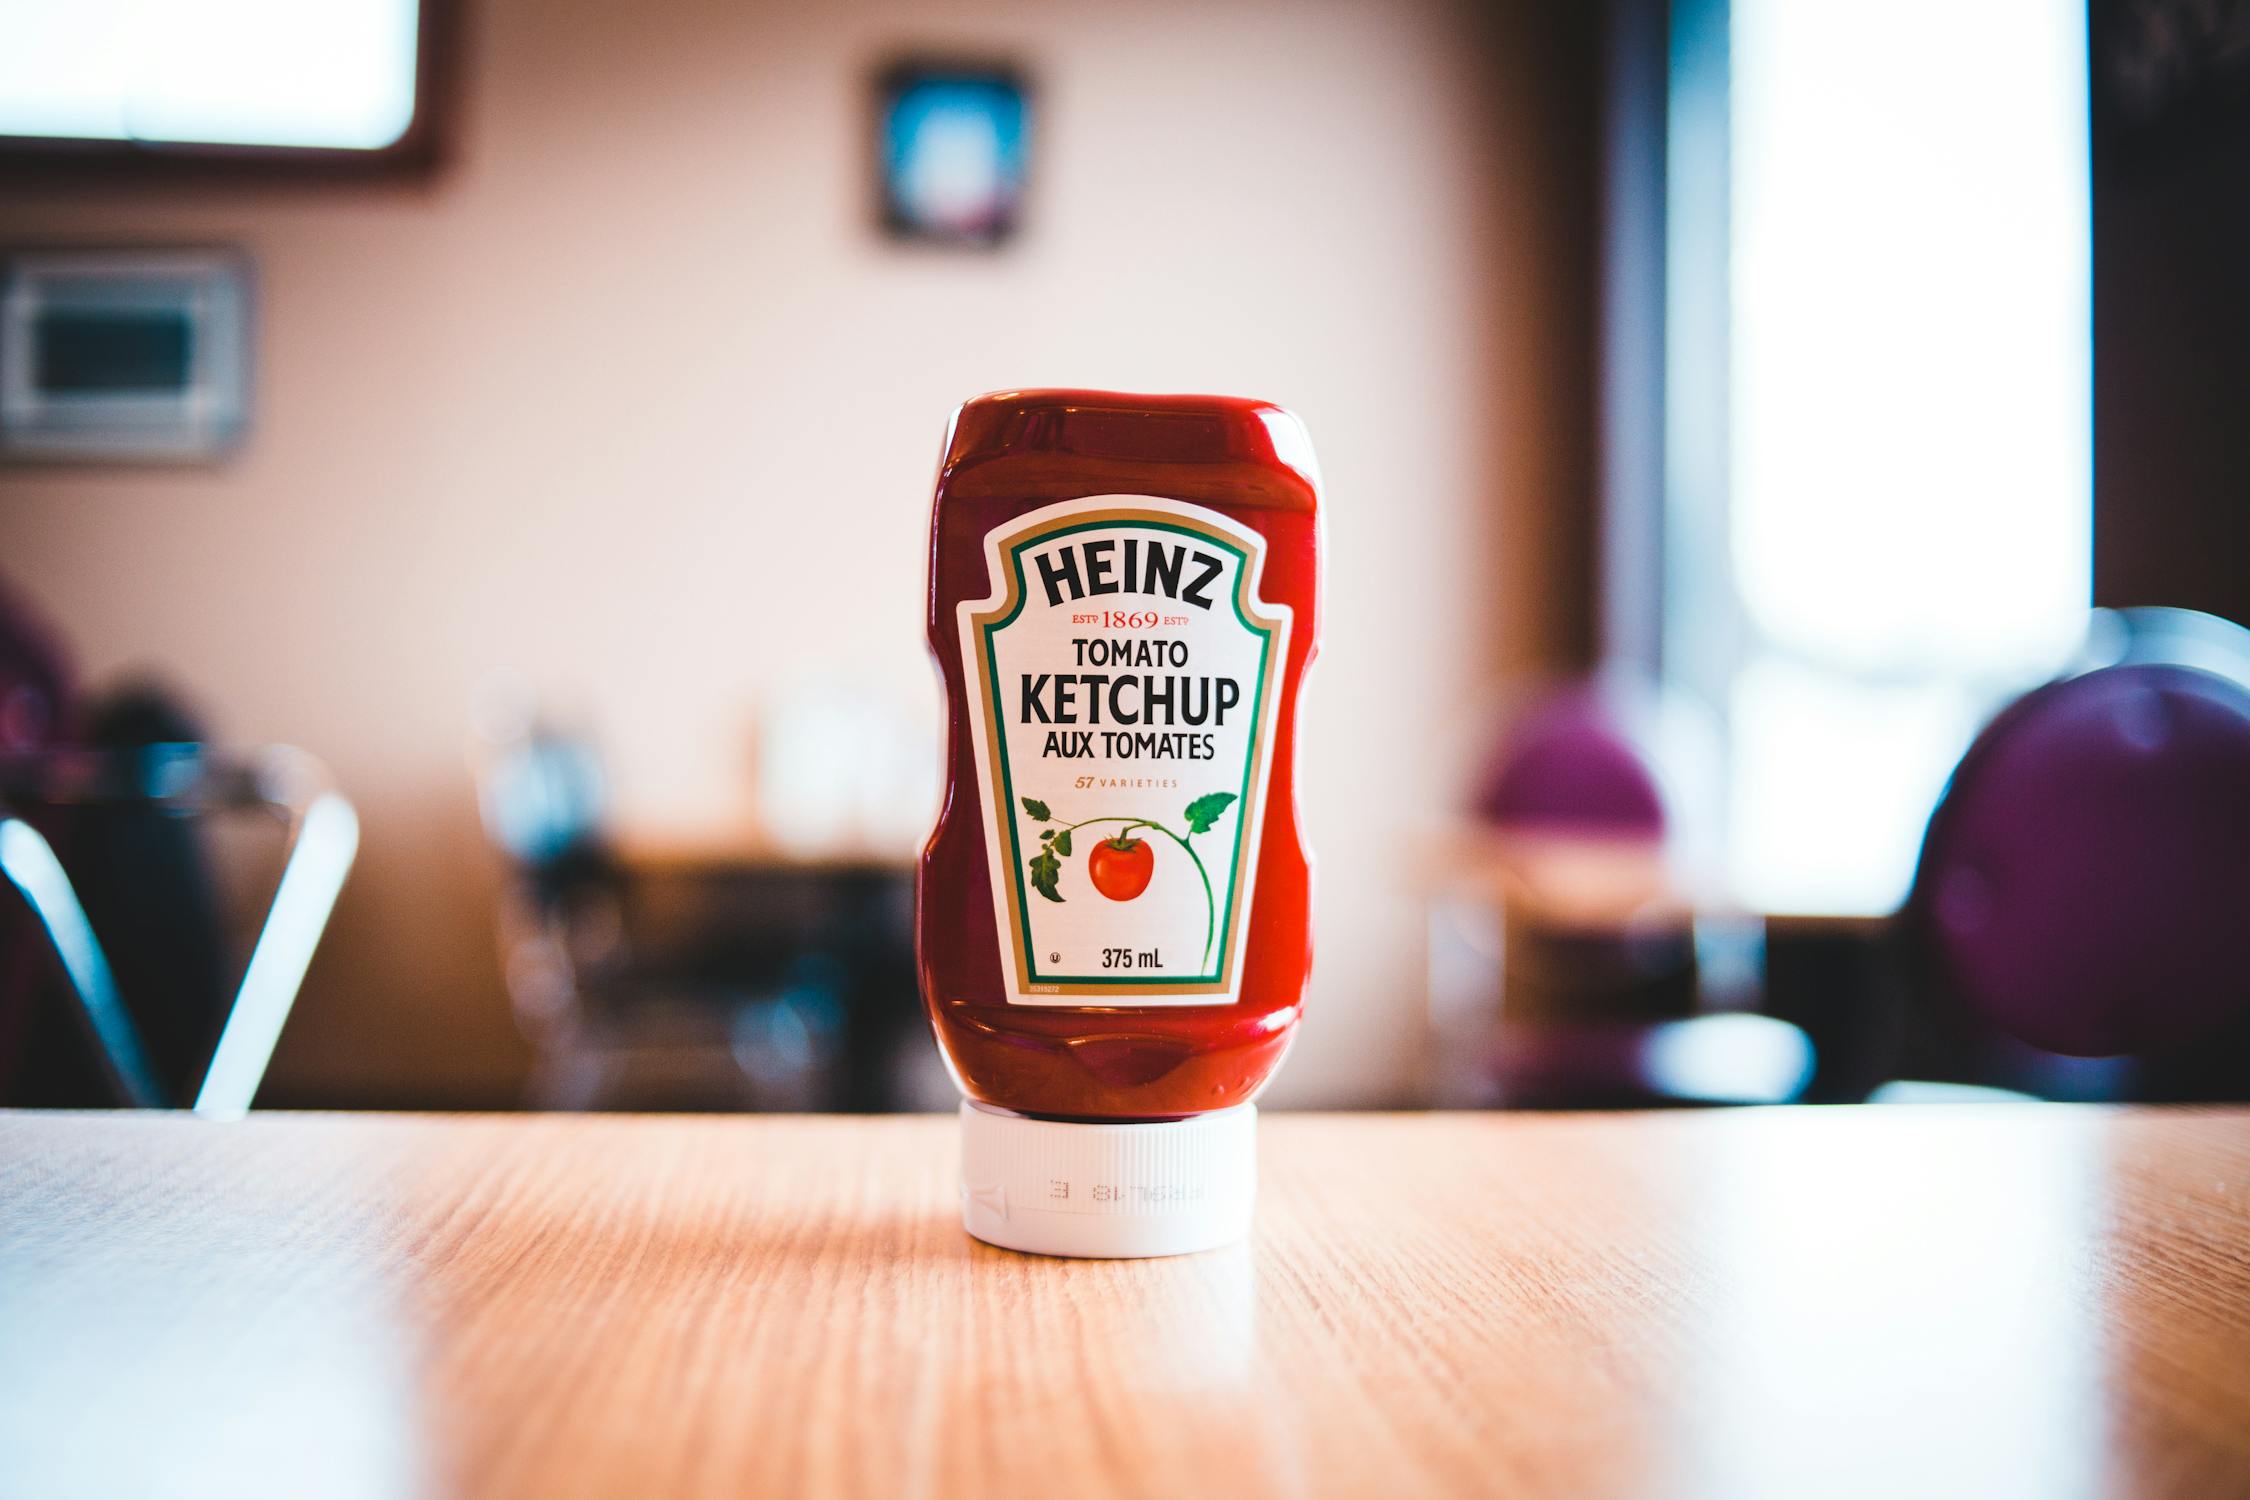 Heinz ketchup bottle on a wooden table